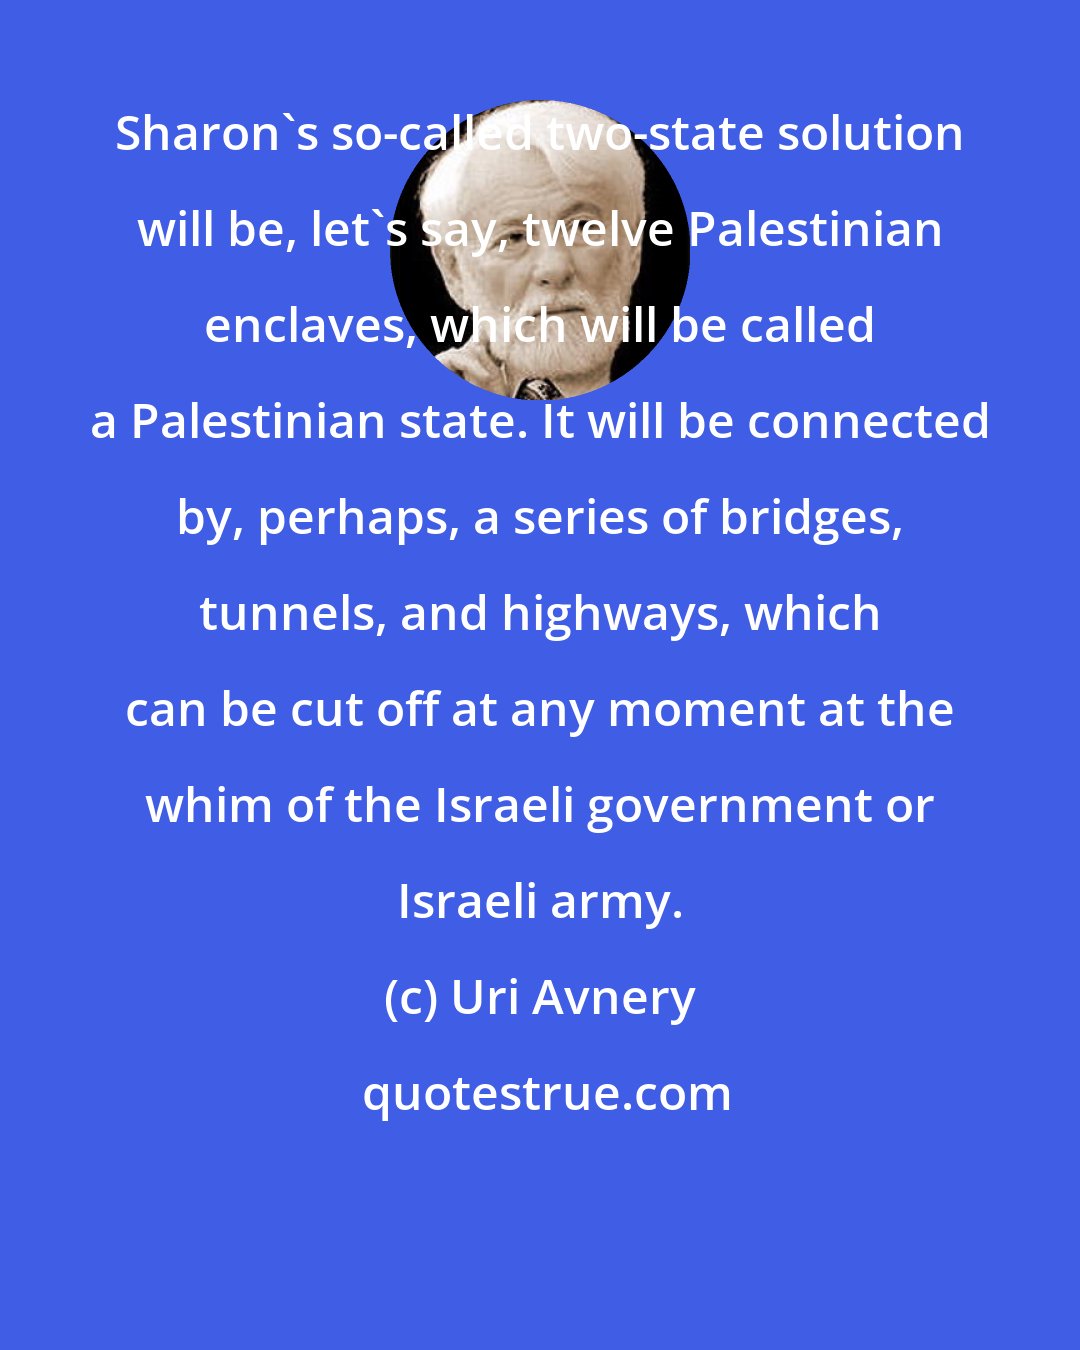 Uri Avnery: Sharon's so-called two-state solution will be, let's say, twelve Palestinian enclaves, which will be called a Palestinian state. It will be connected by, perhaps, a series of bridges, tunnels, and highways, which can be cut off at any moment at the whim of the Israeli government or Israeli army.